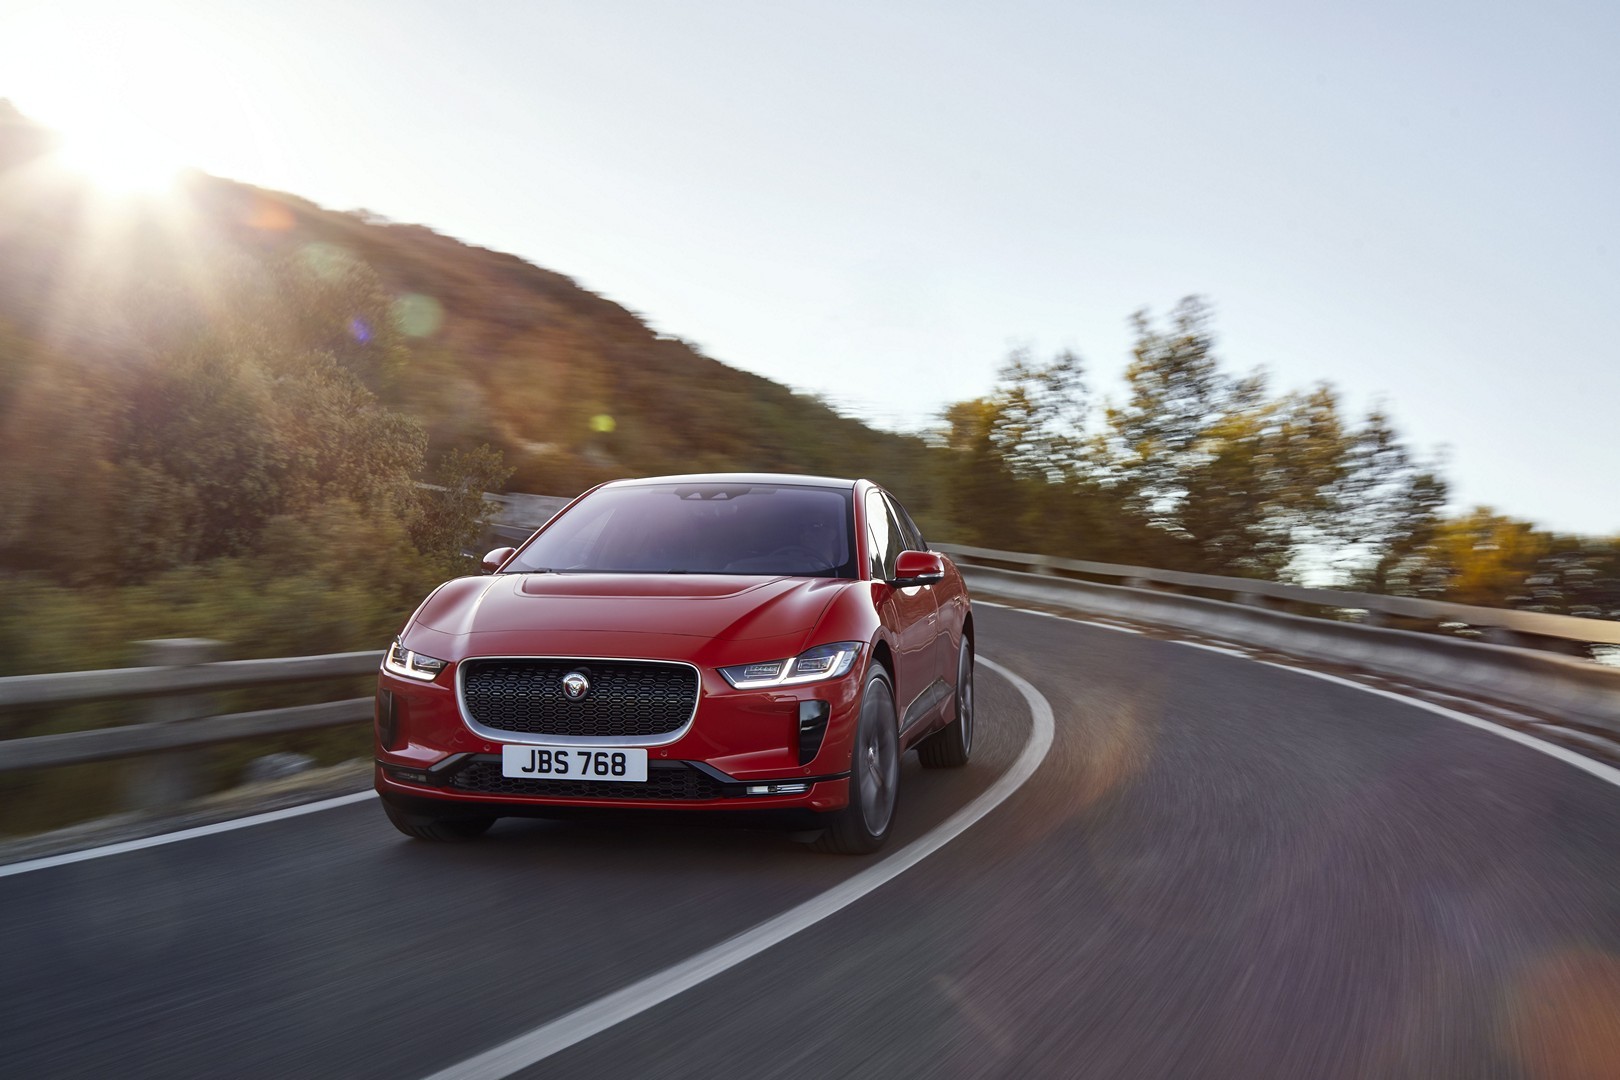 https://s1.cdn.autoevolution.com/images/news/gallery/2020-jaguar-i-pace-update-offers-234-miles-of-range-thanks-to-etrophy-know-how_81.jpg